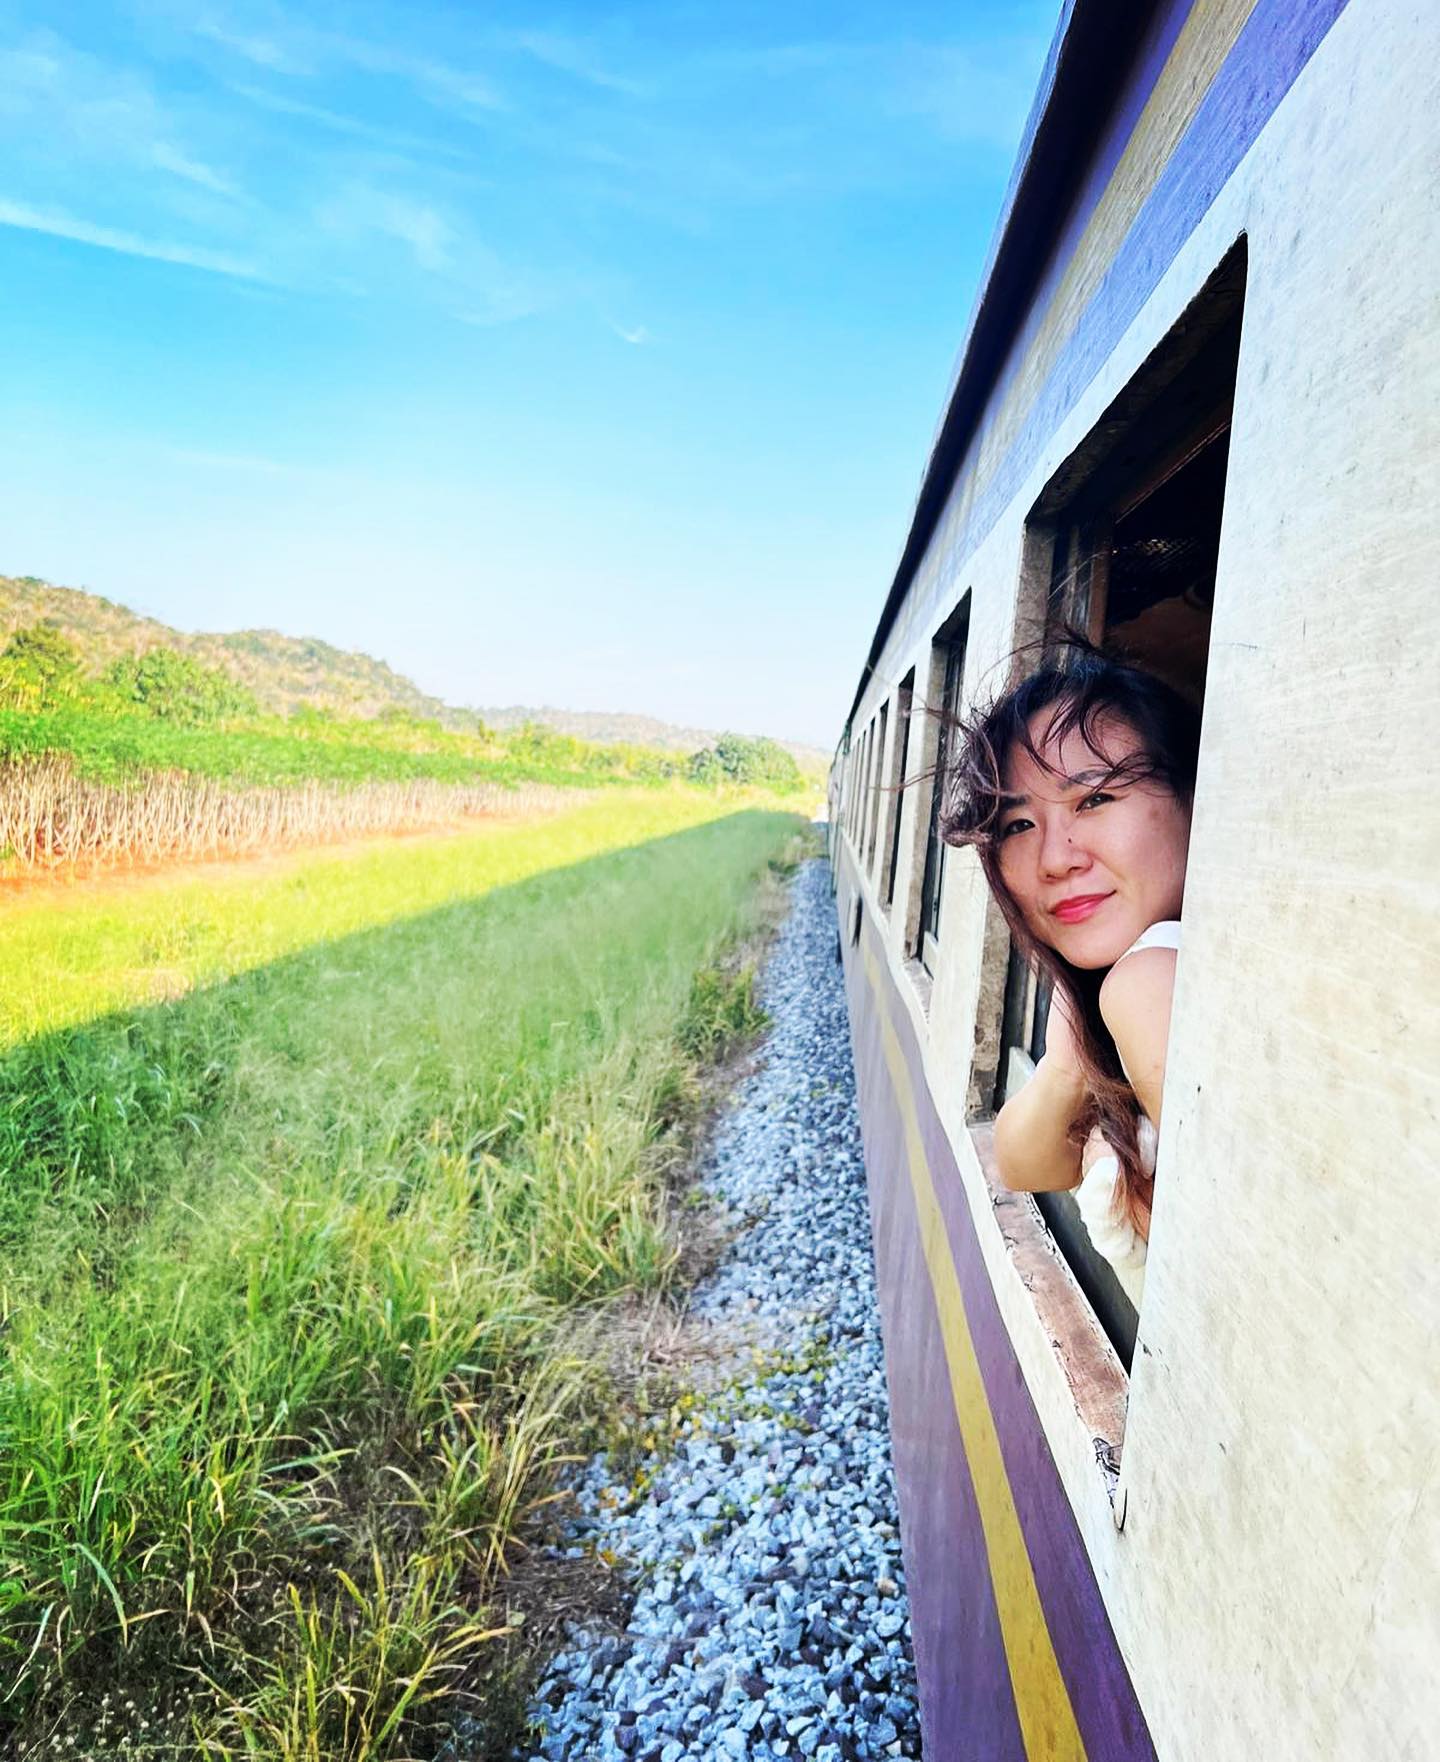 Scenic Train Rides in Asia - Special Express No. 46 train to Bangkok